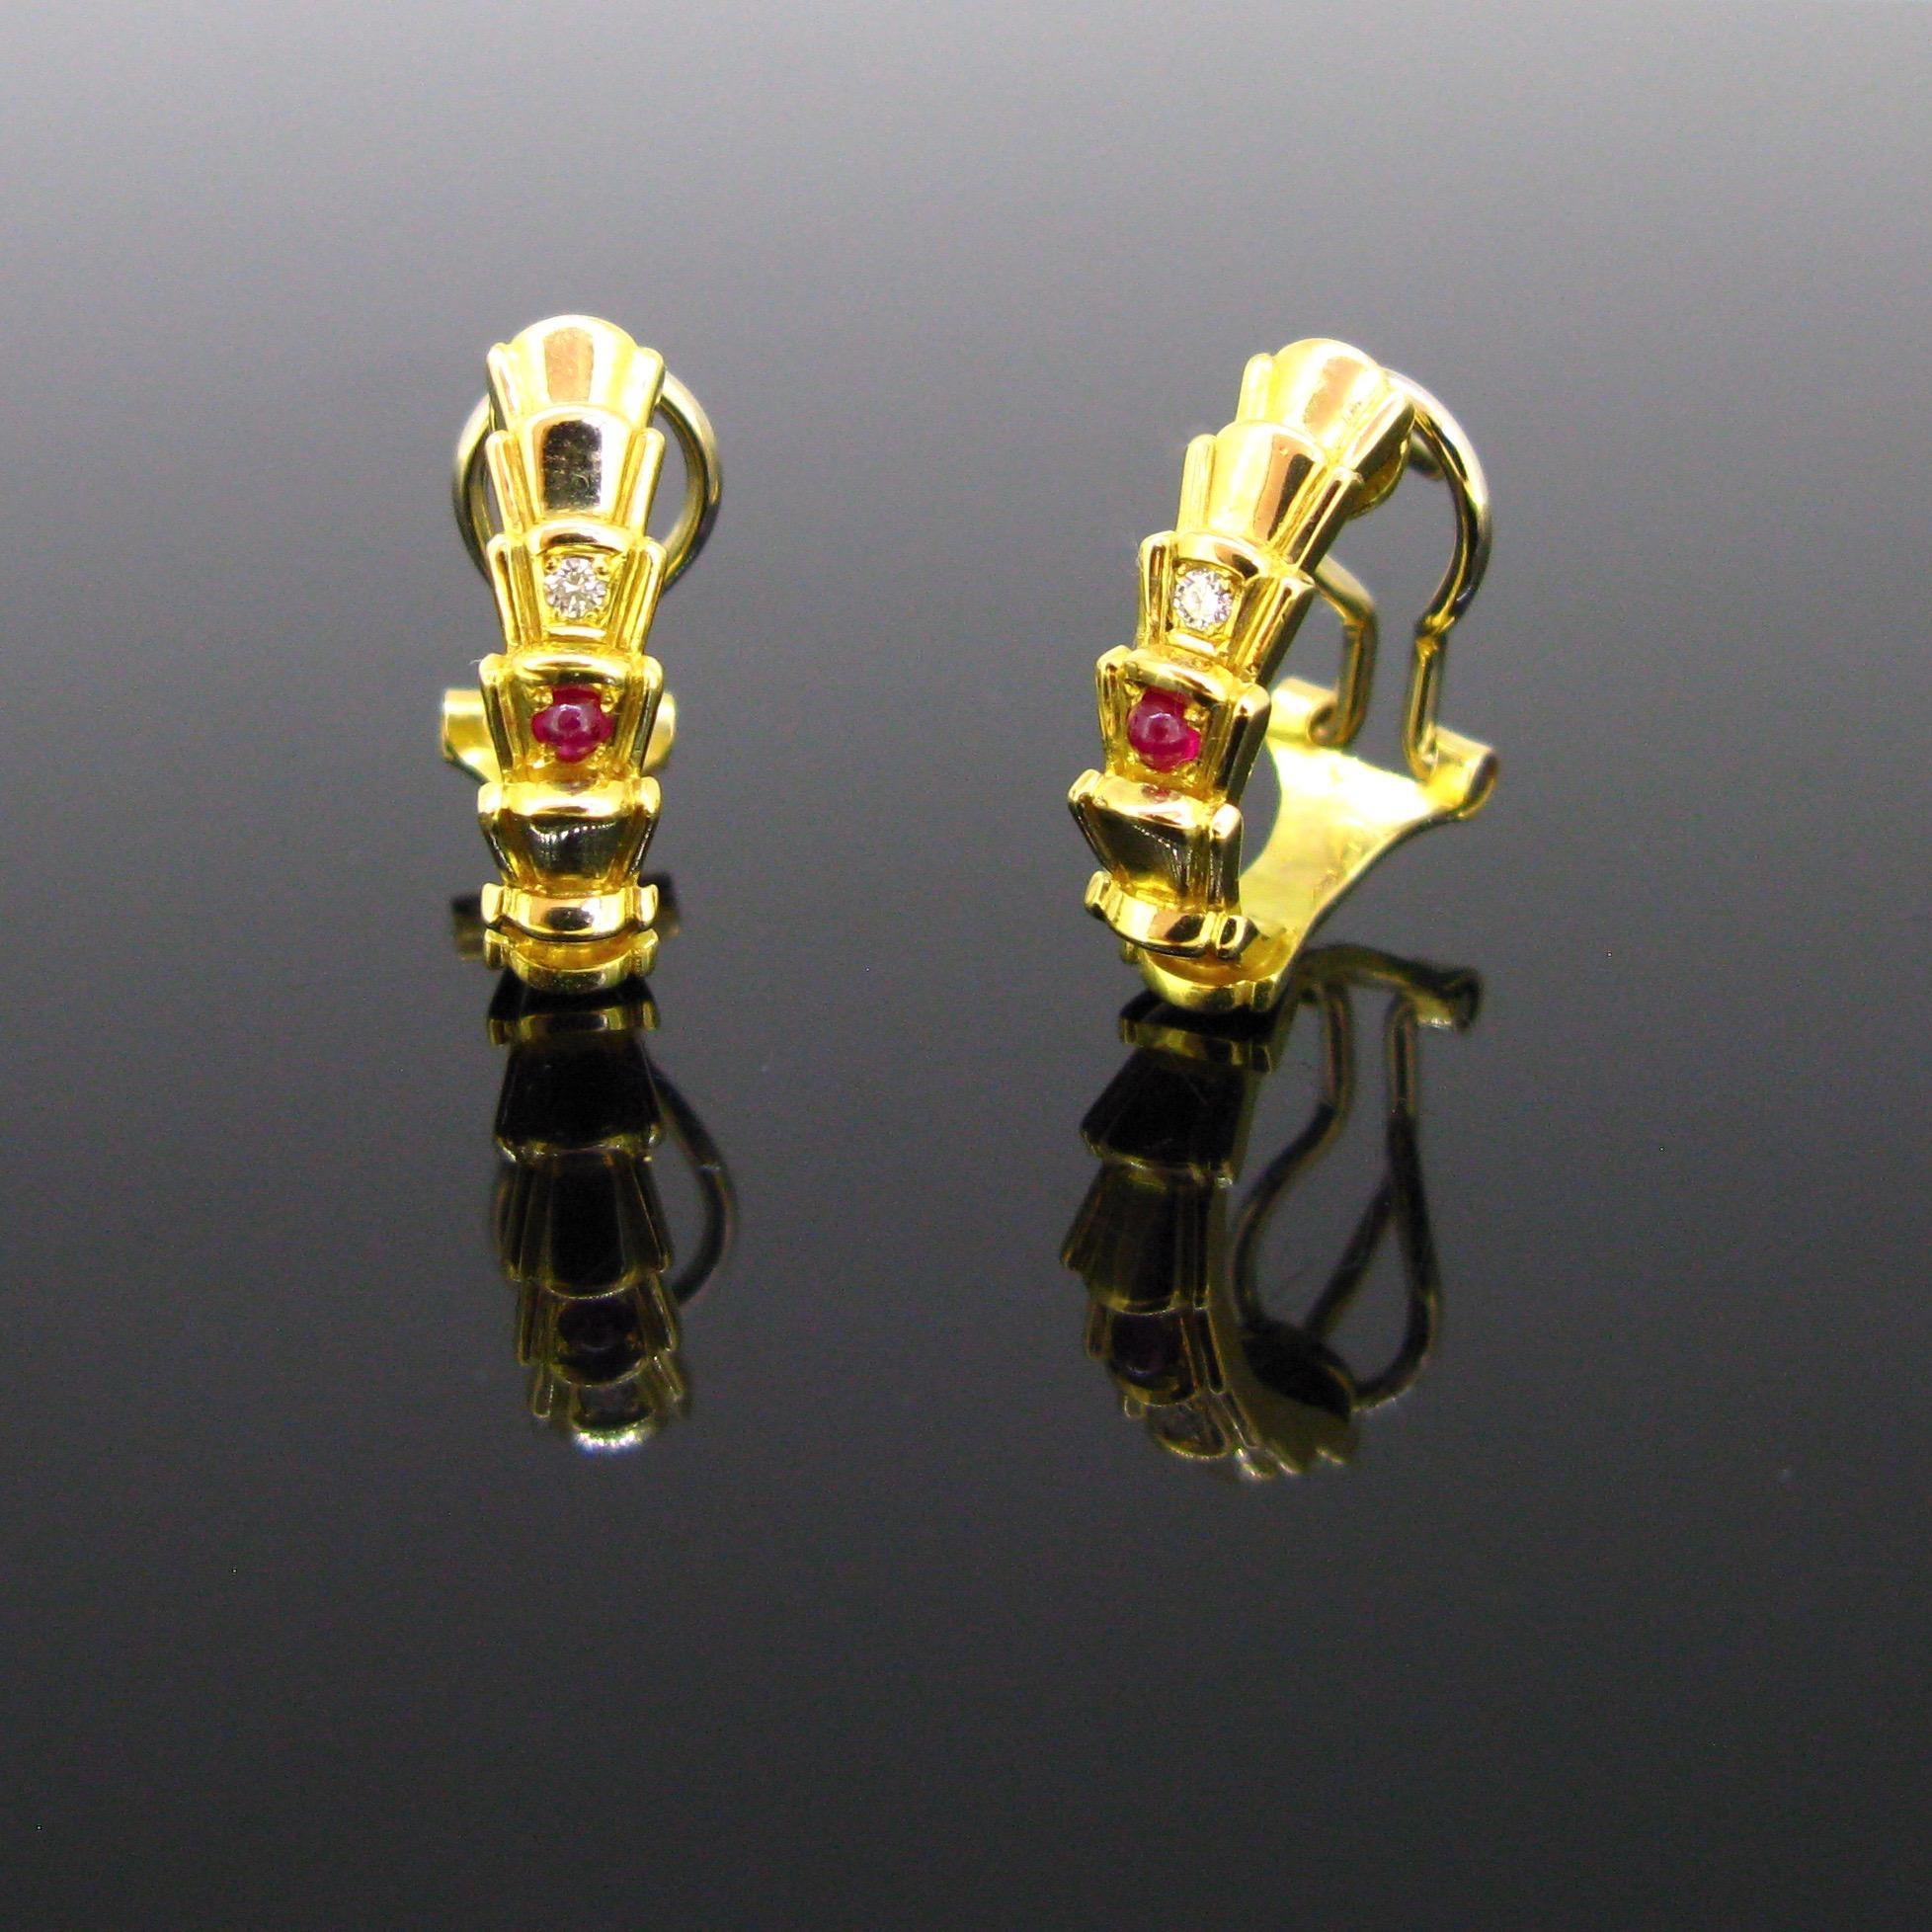 These lovely earrings from the Eighties have an nice geometric design. The earrings are in very good vintage condition. They are each set with a brilliant cut diamond and a cabochon ruby. They are signed Ch. Dior on the clip. They are very easy to